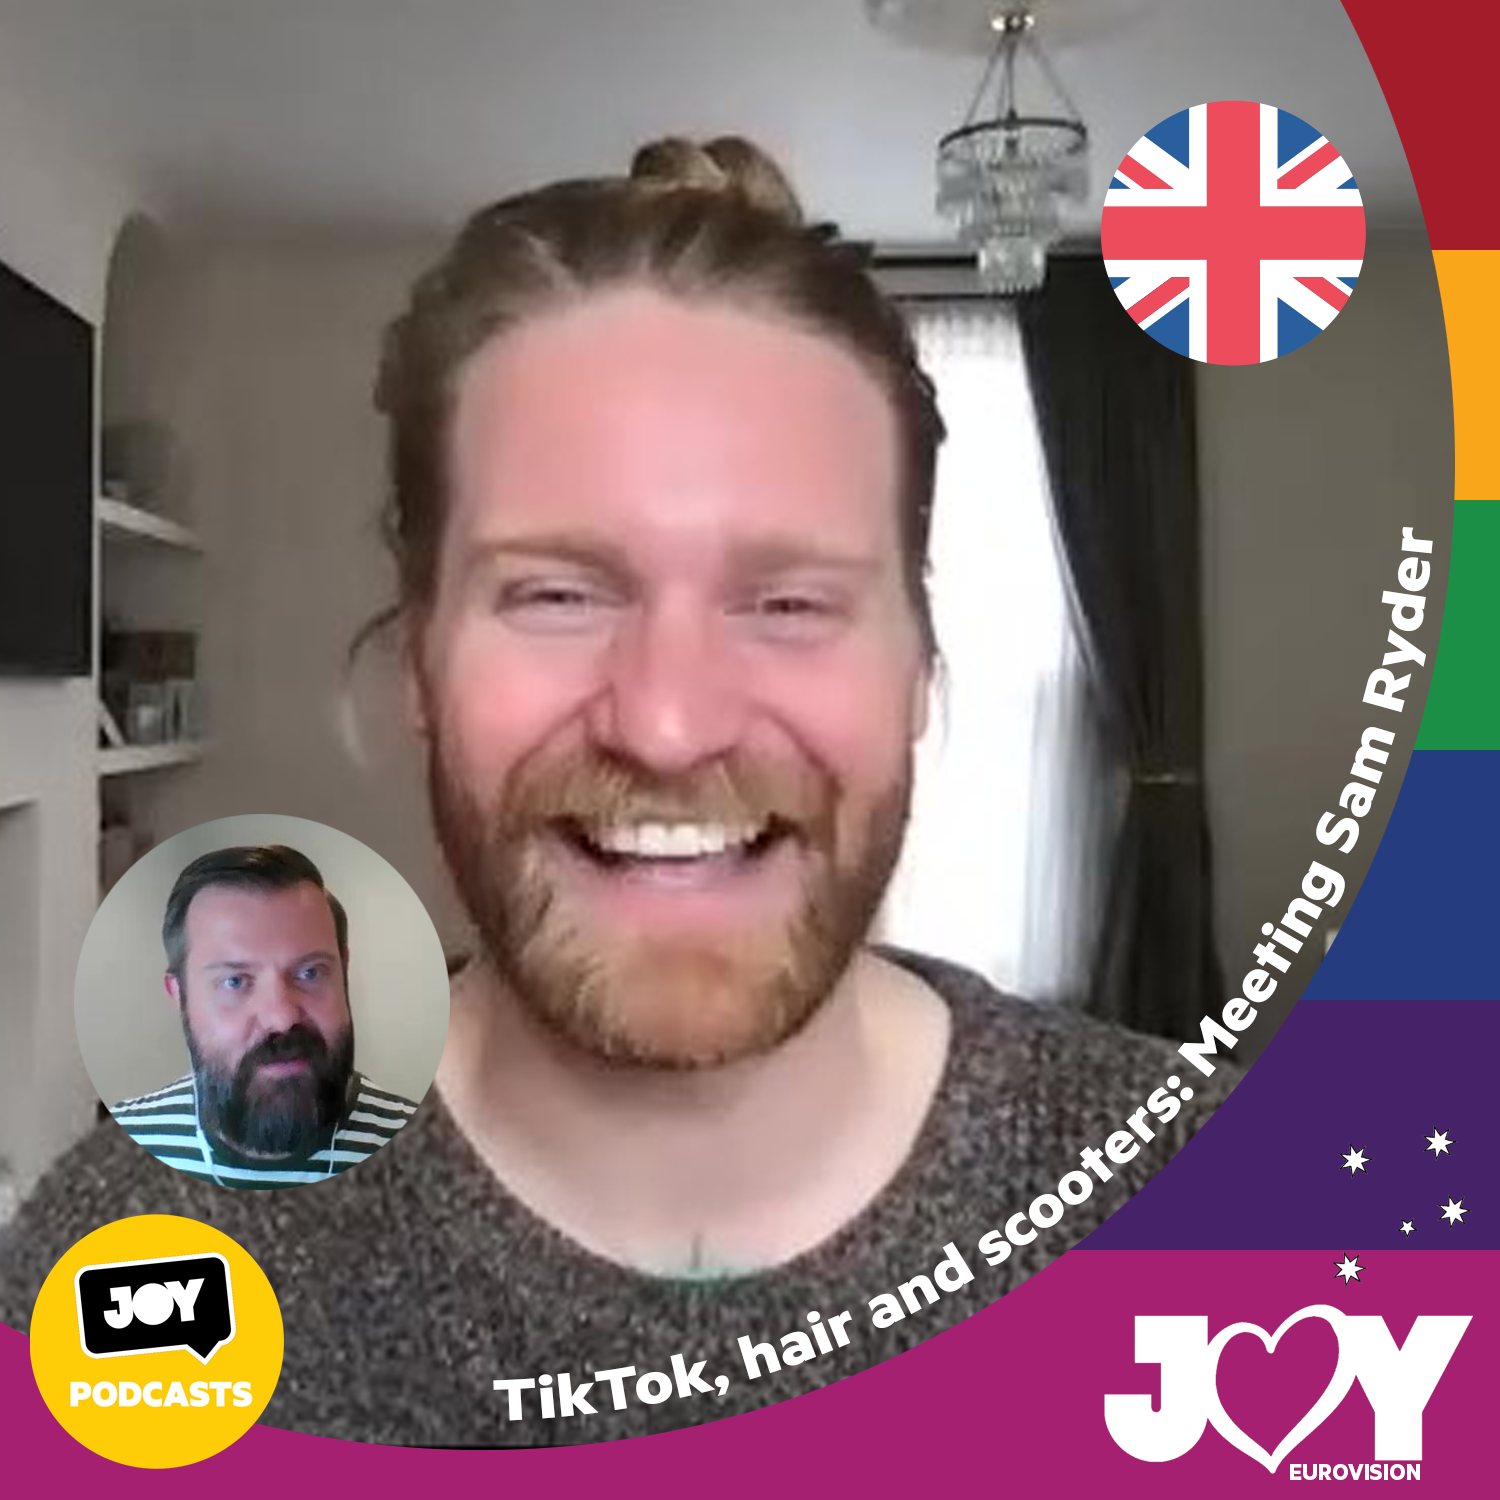 🇬🇧 TikTok, hair and scooters: Meeting Sam Ryder